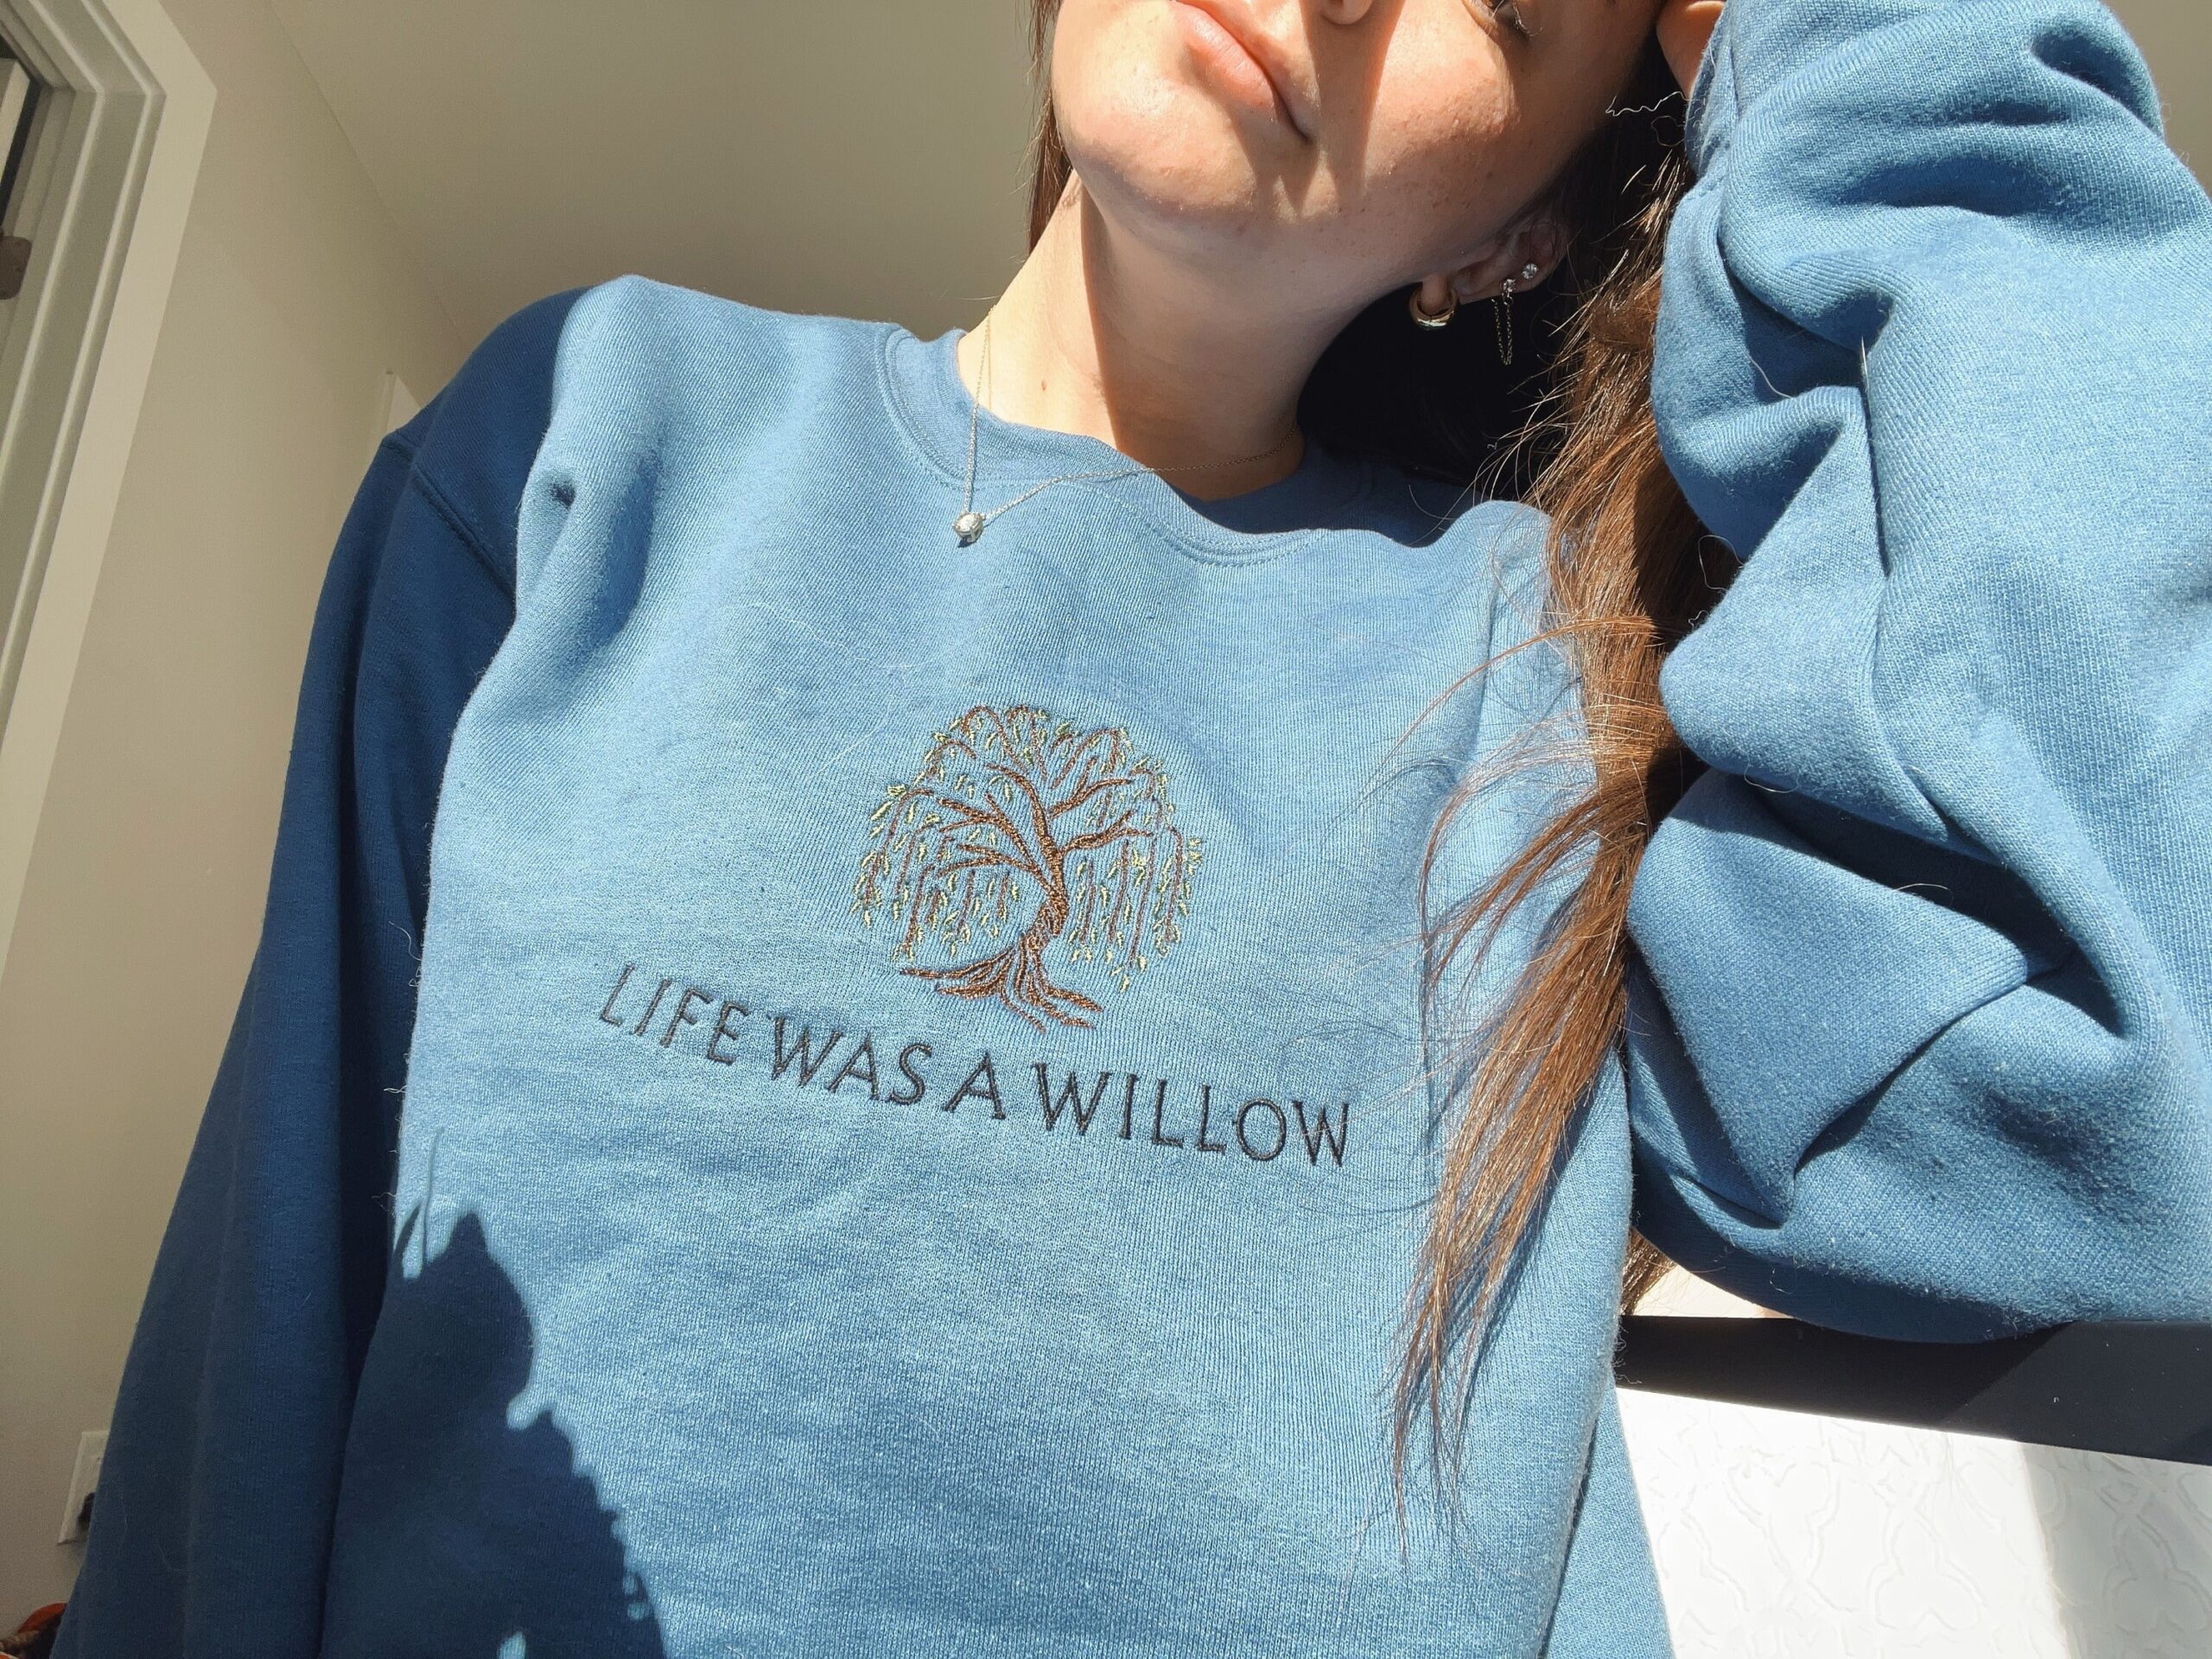 taylor-swift-life-was-a-willow-evermore-embroidered-crewneck_1668809044-scaled-1.jpg